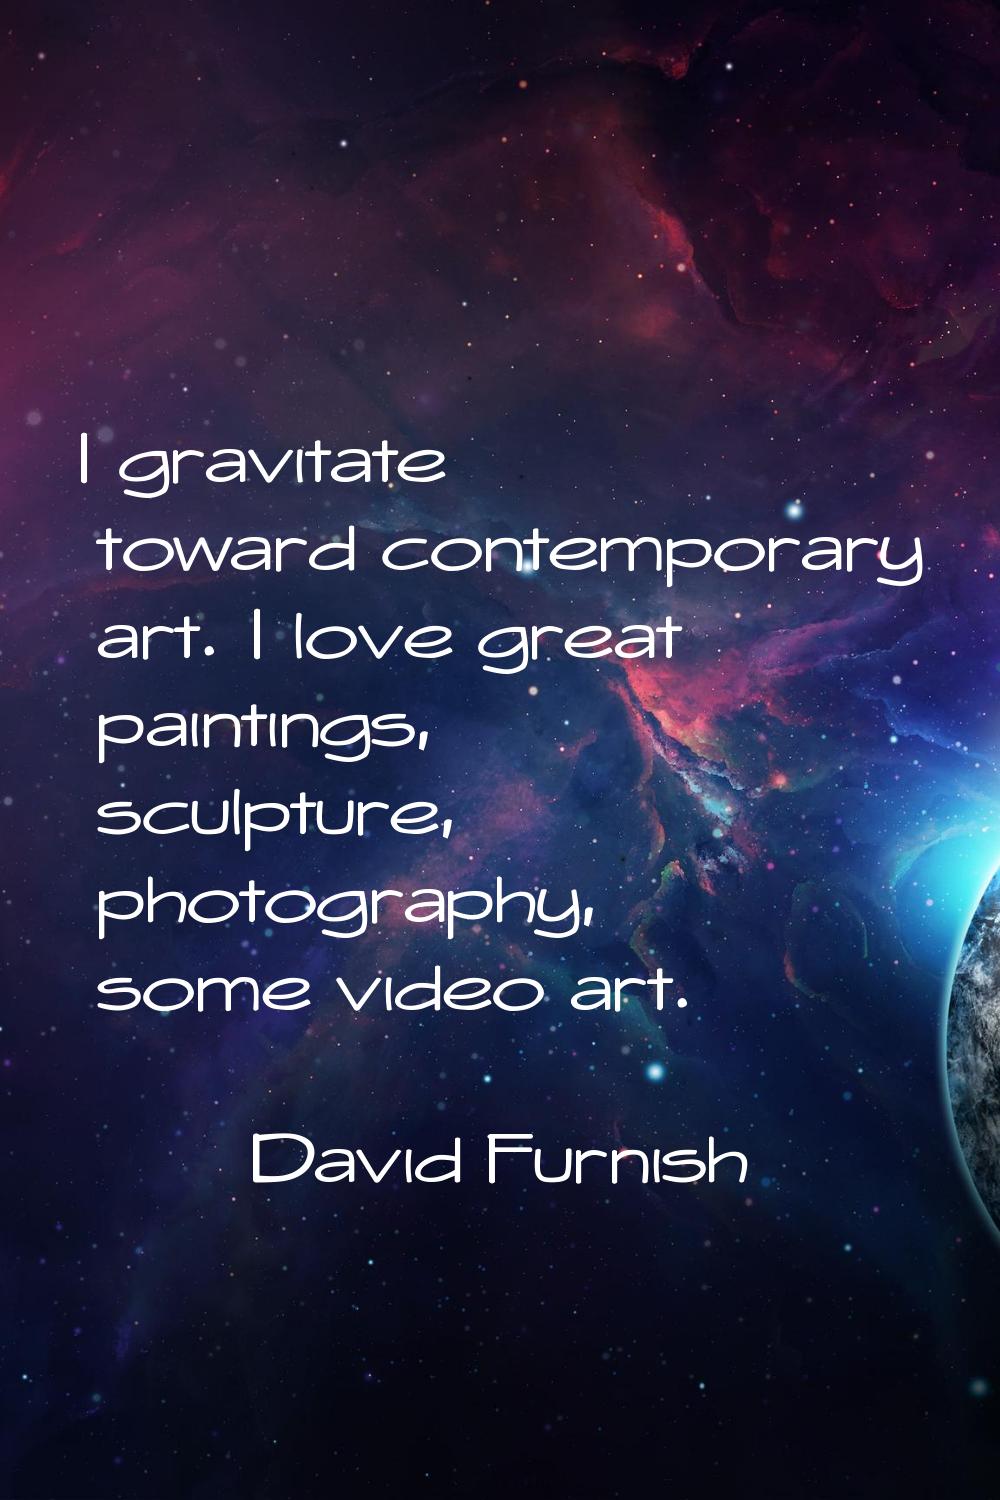 I gravitate toward contemporary art. I love great paintings, sculpture, photography, some video art